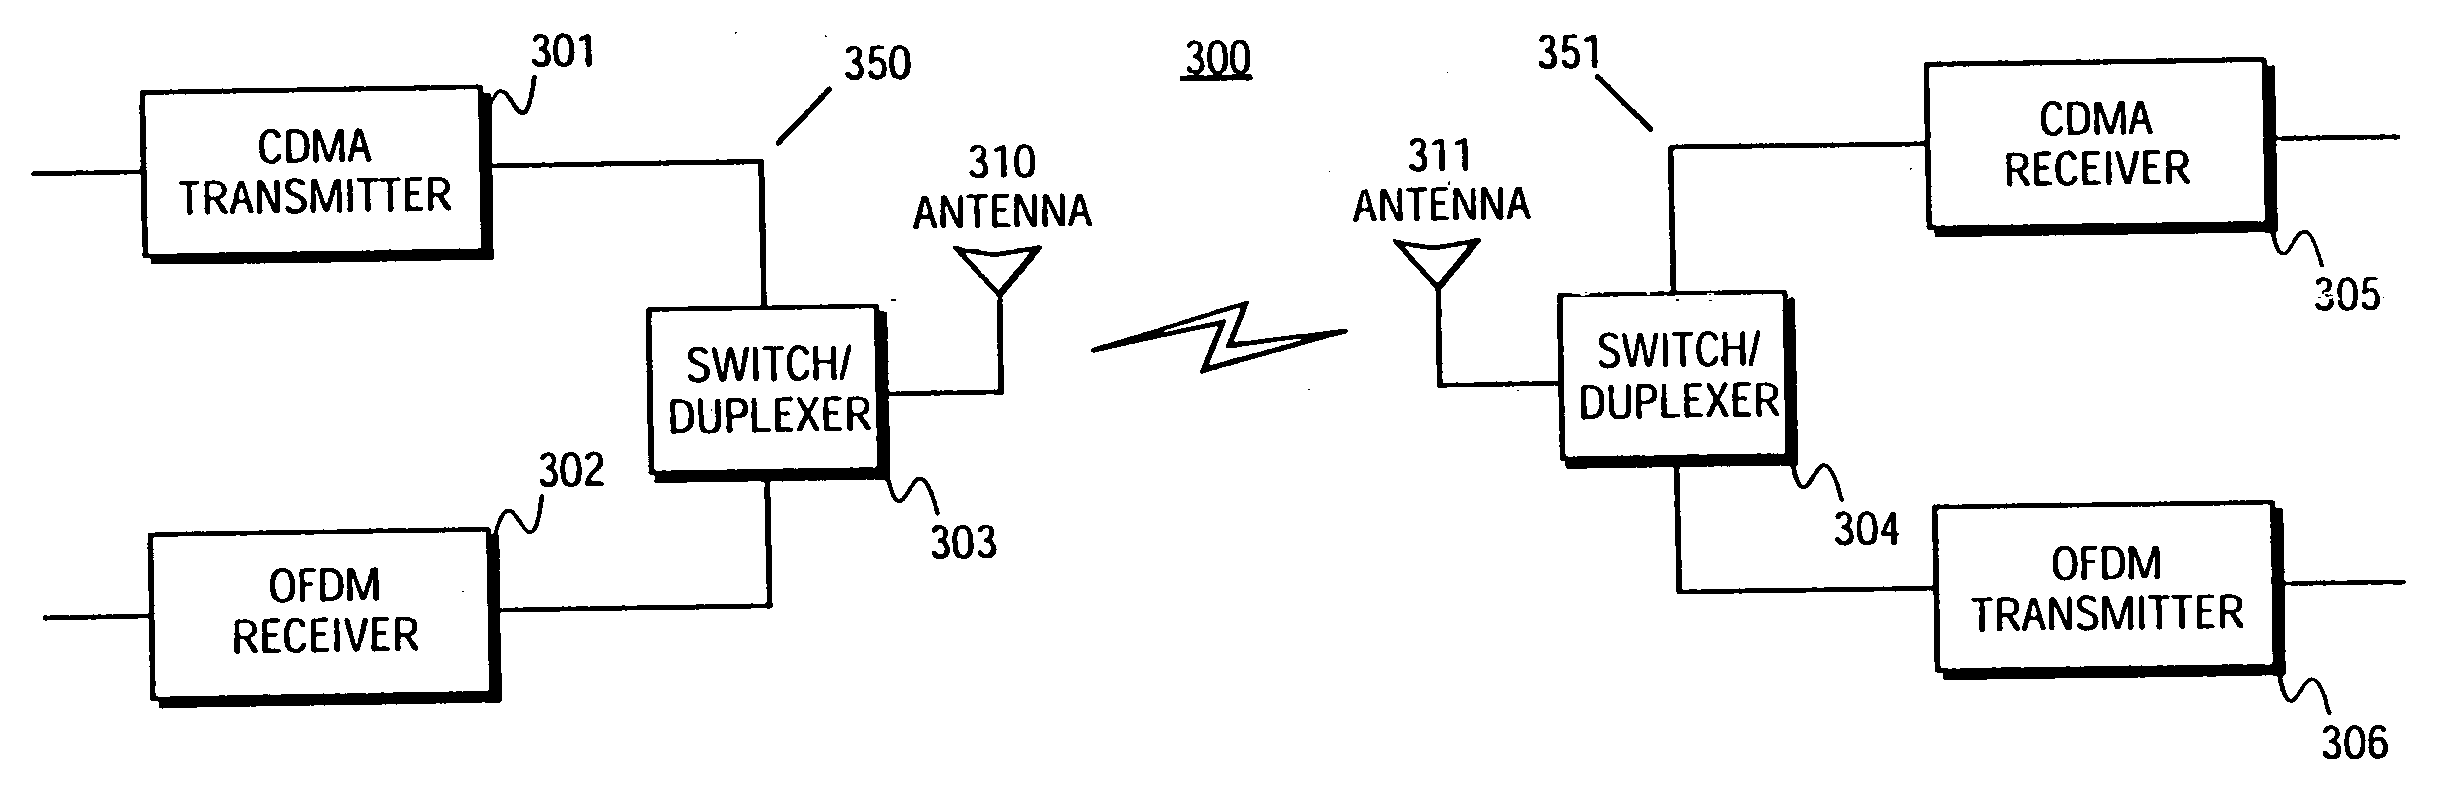 Communication system using OFDM for one direction and DSSS for another direction